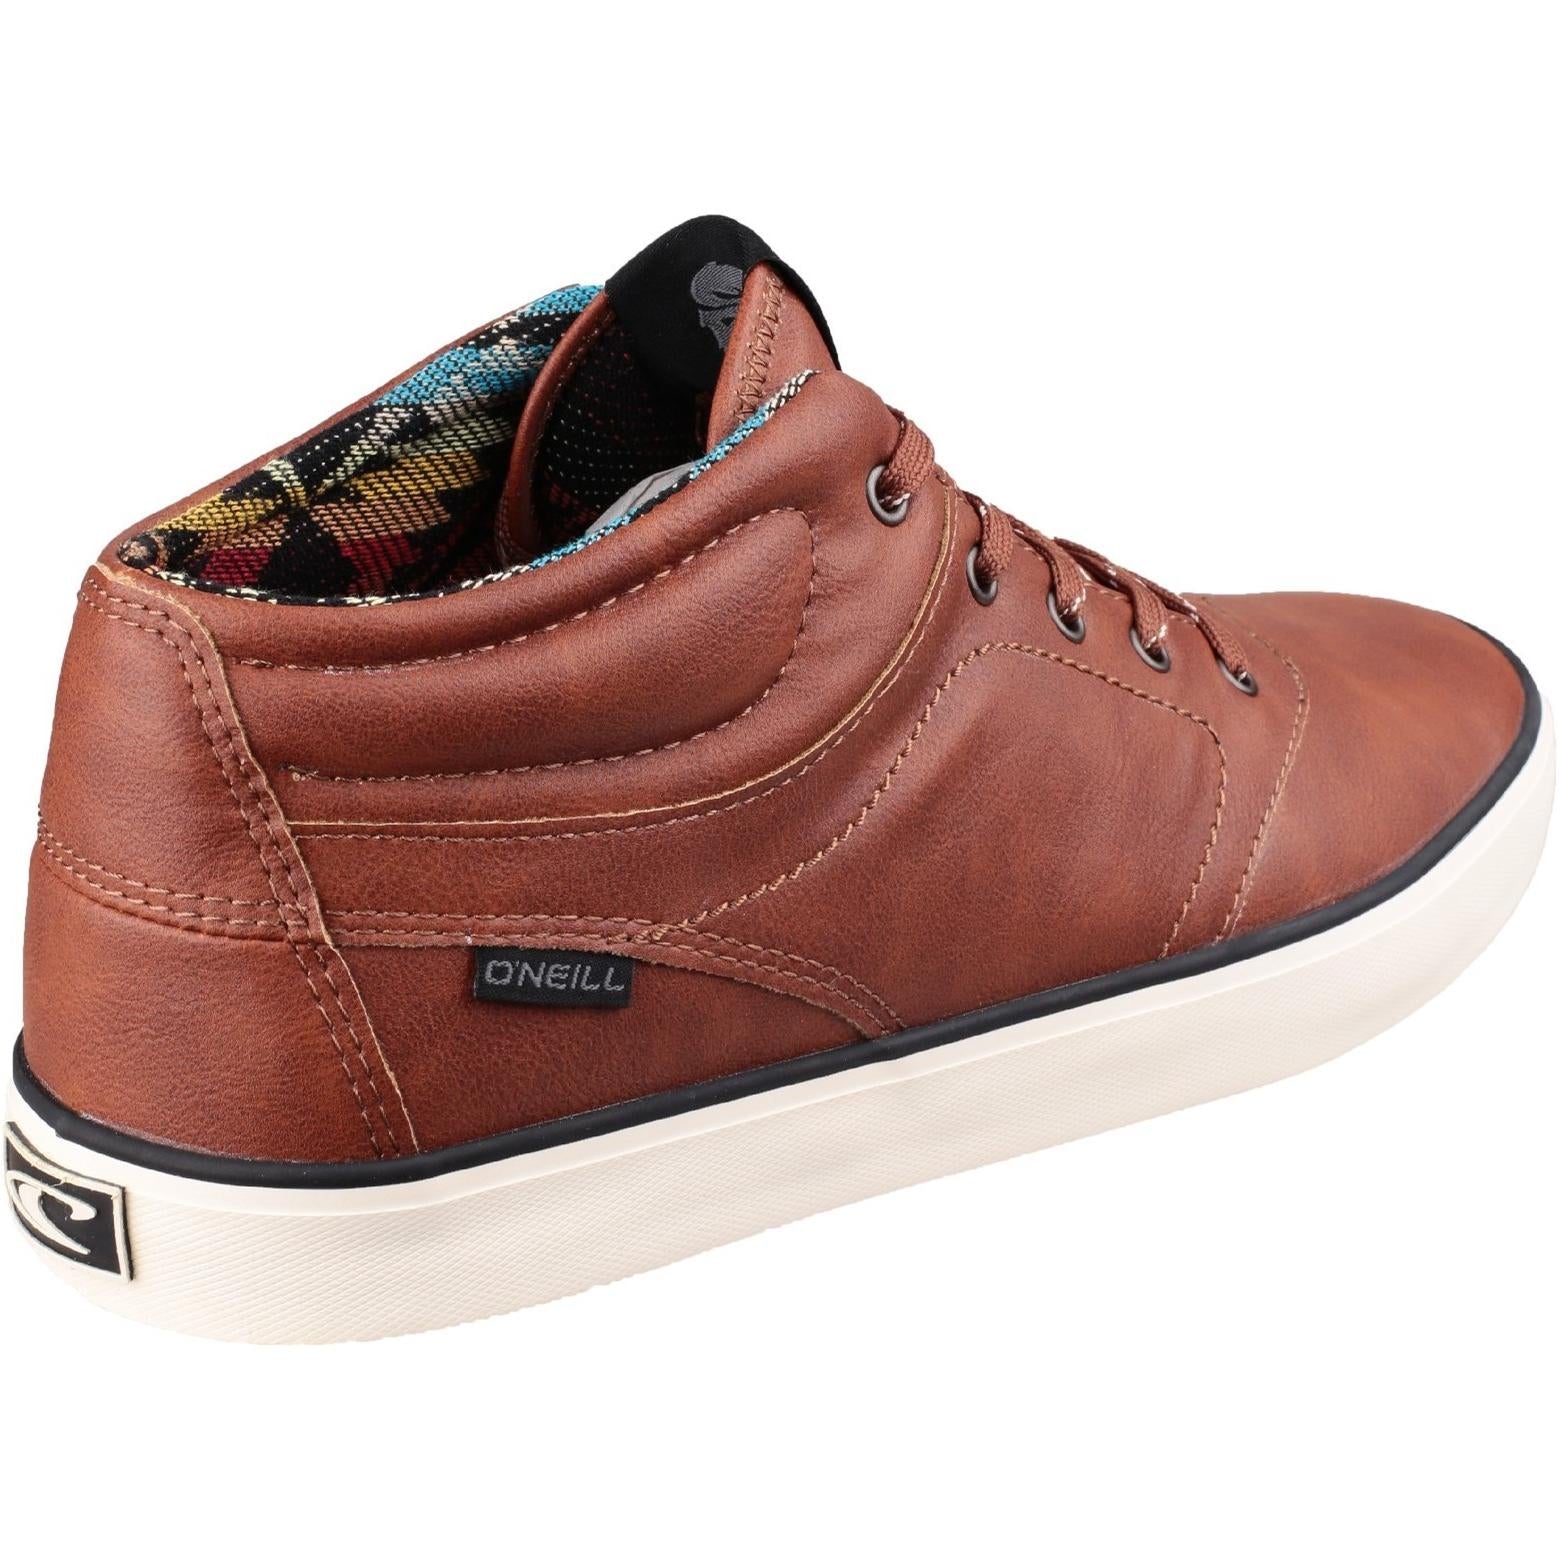 O'neill Psycho Mid Lace up Shoes